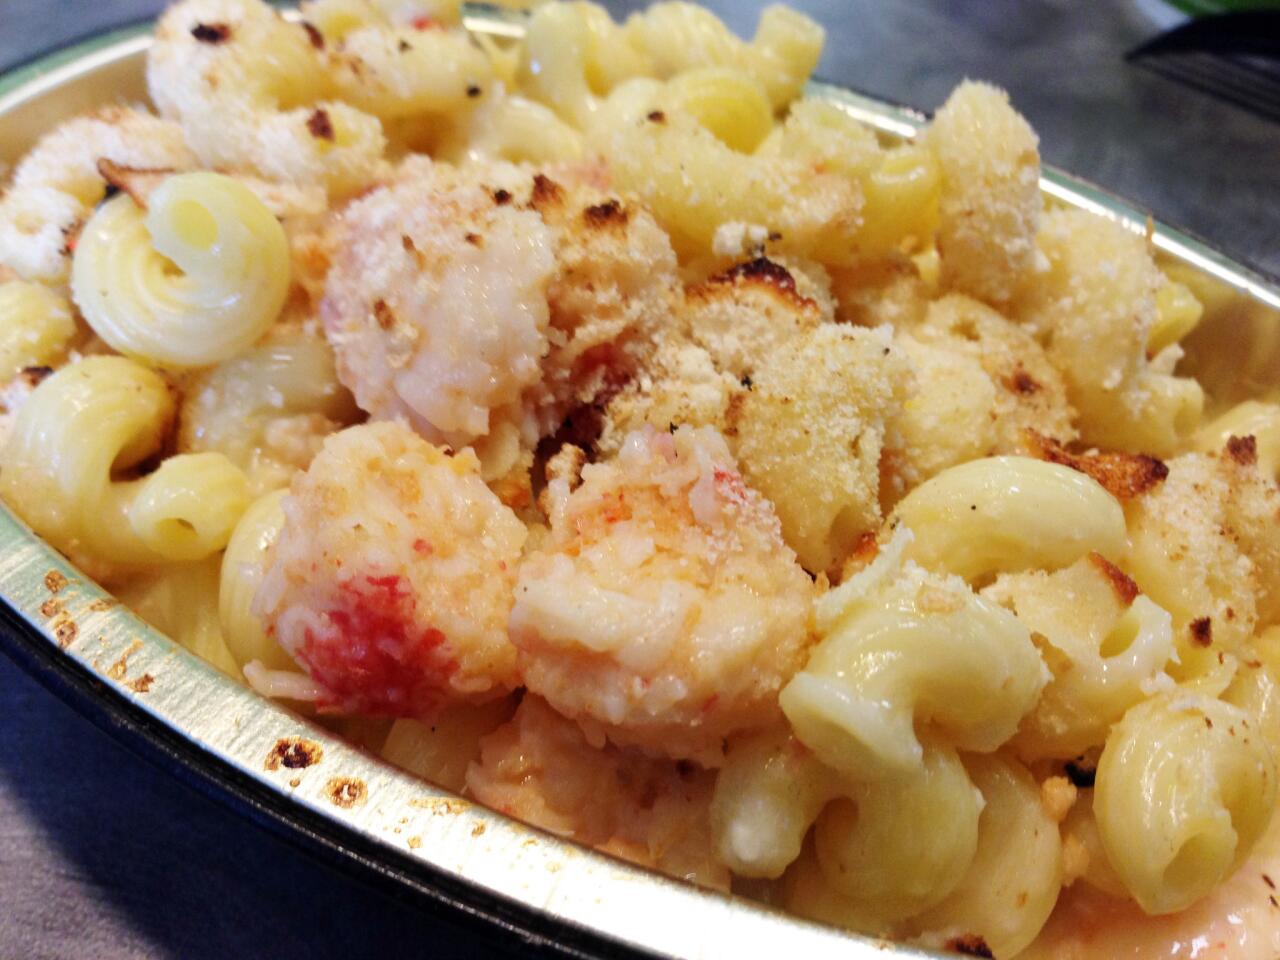 The lobster and seafood mac and cheese.